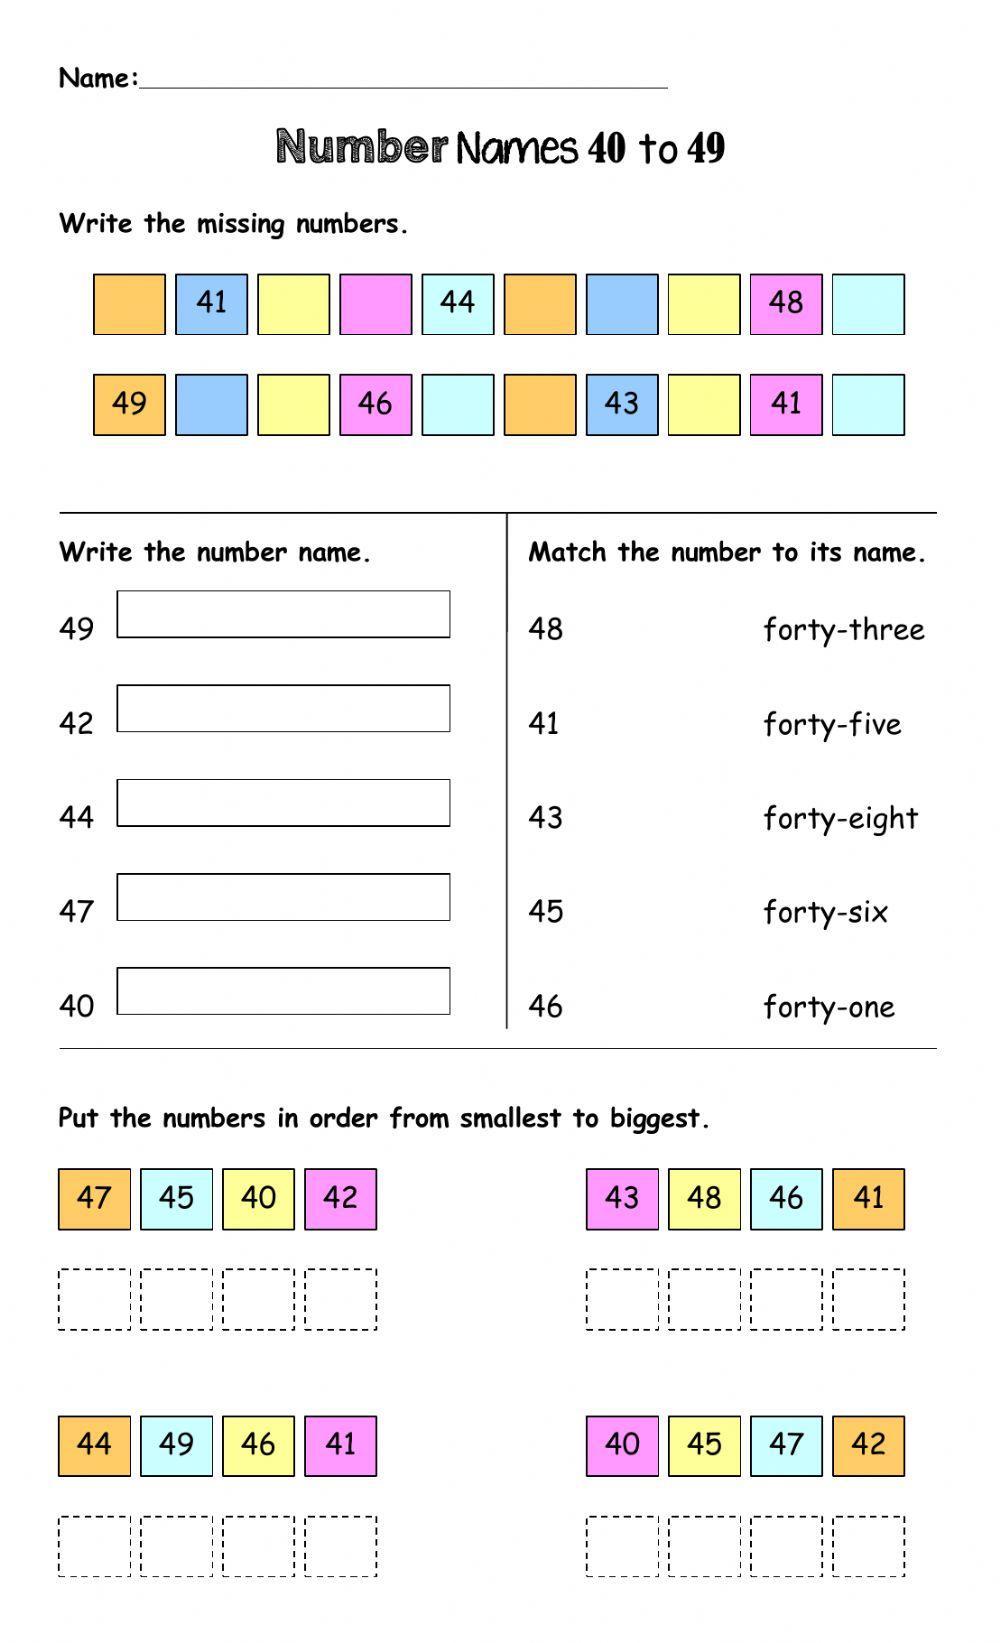 Number Names 40 to 49